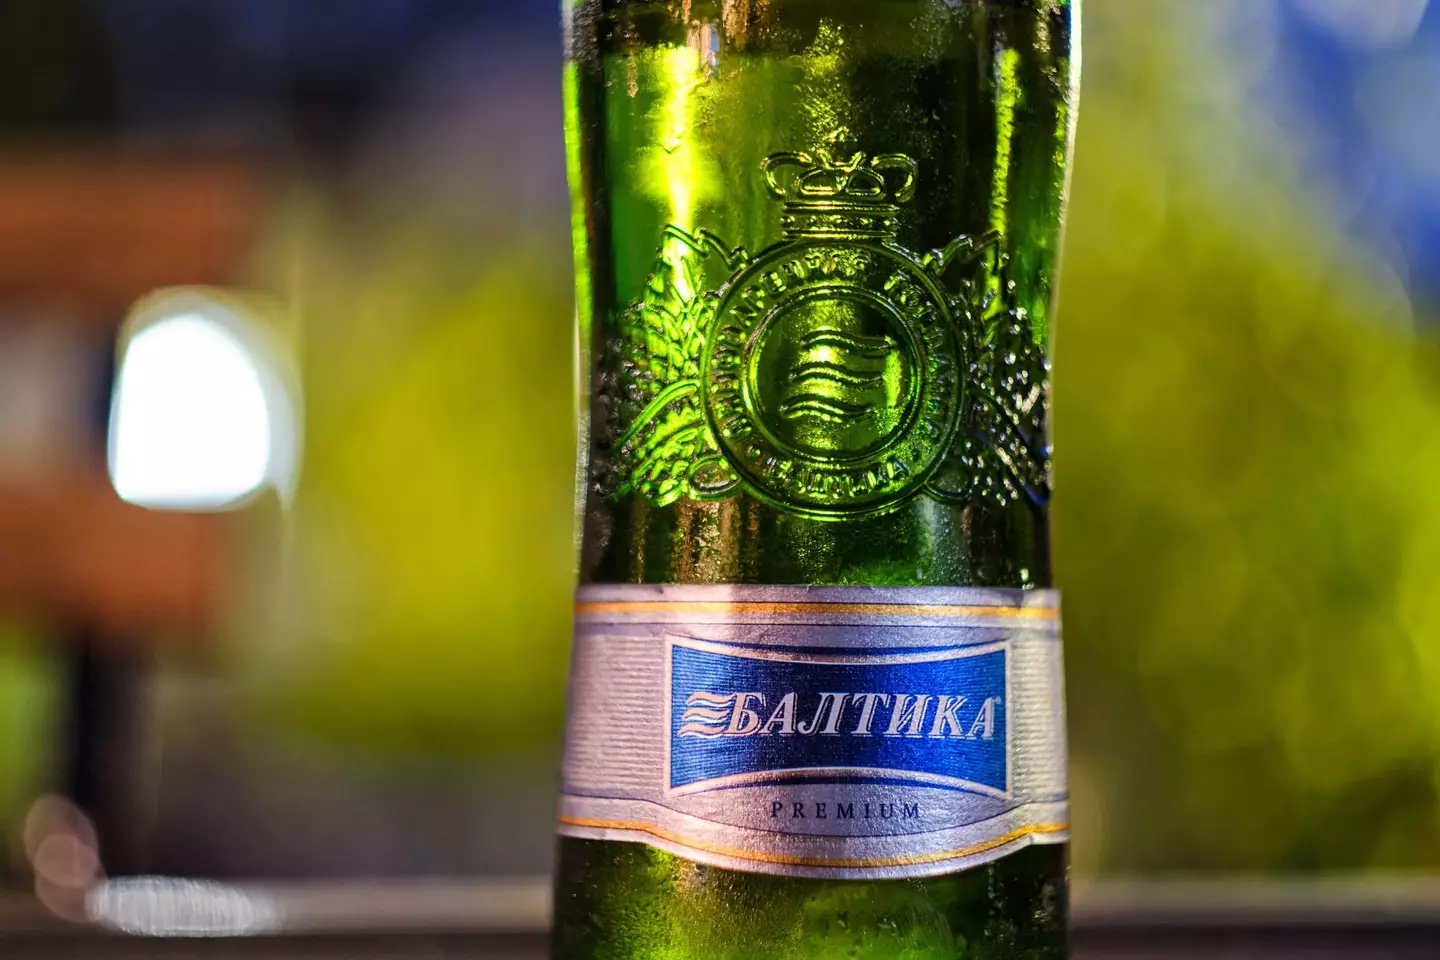 Wetherspoon pubs have also removed Baltika Lager from sale.